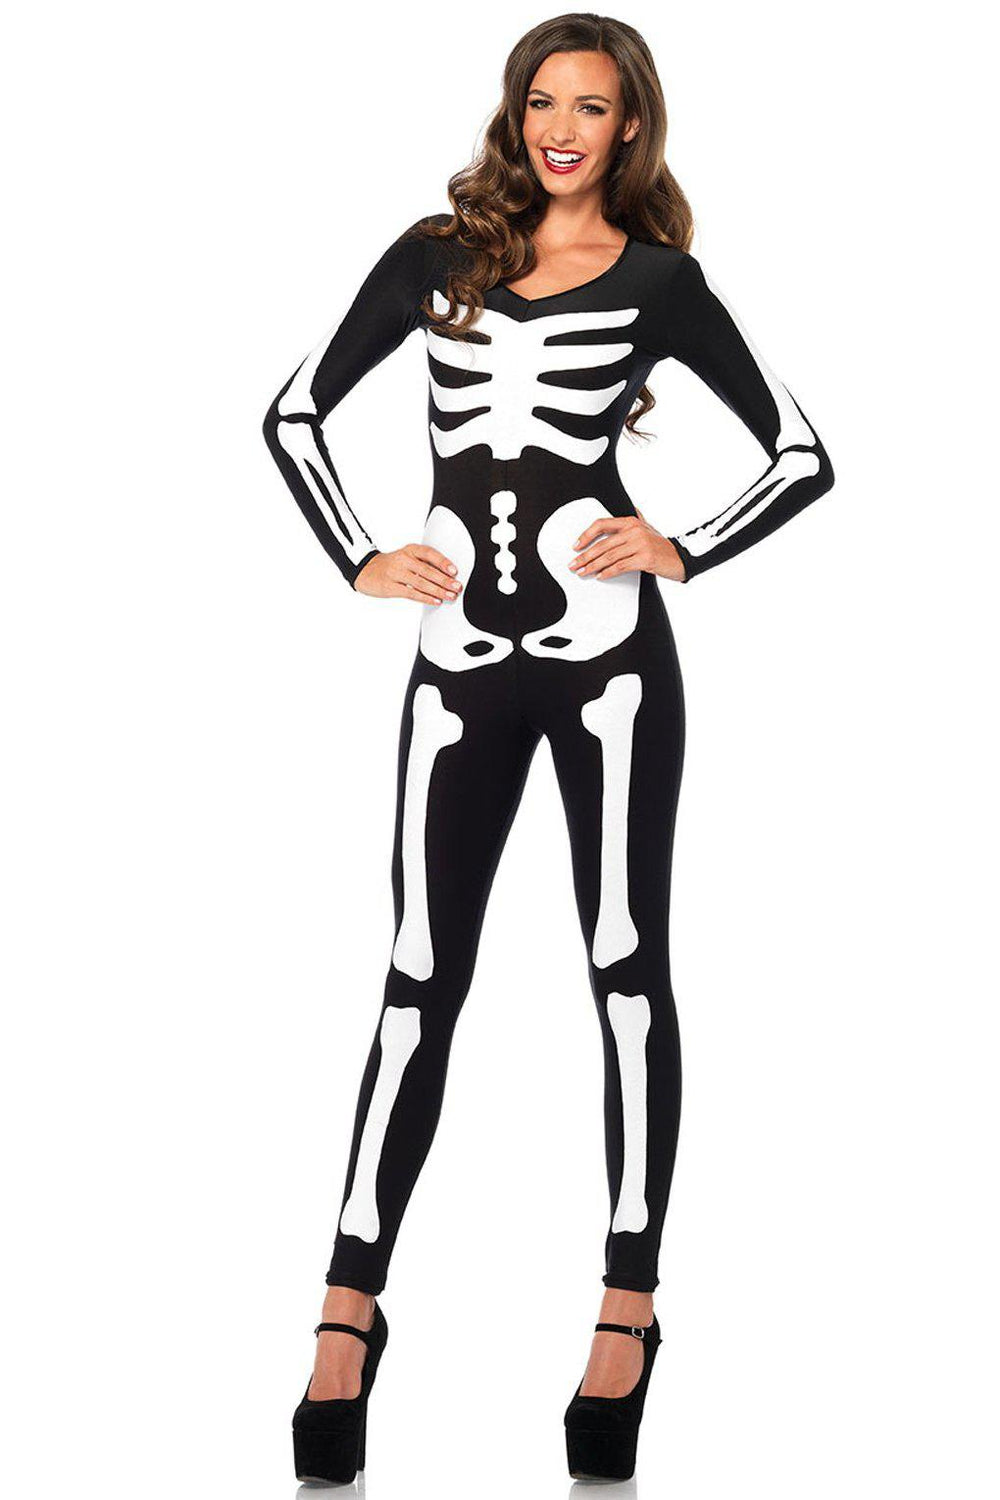 Glow In the Dark Skeleton Catsuit-Other Costumes-Leg Avenue-SEXYSHOES.COM